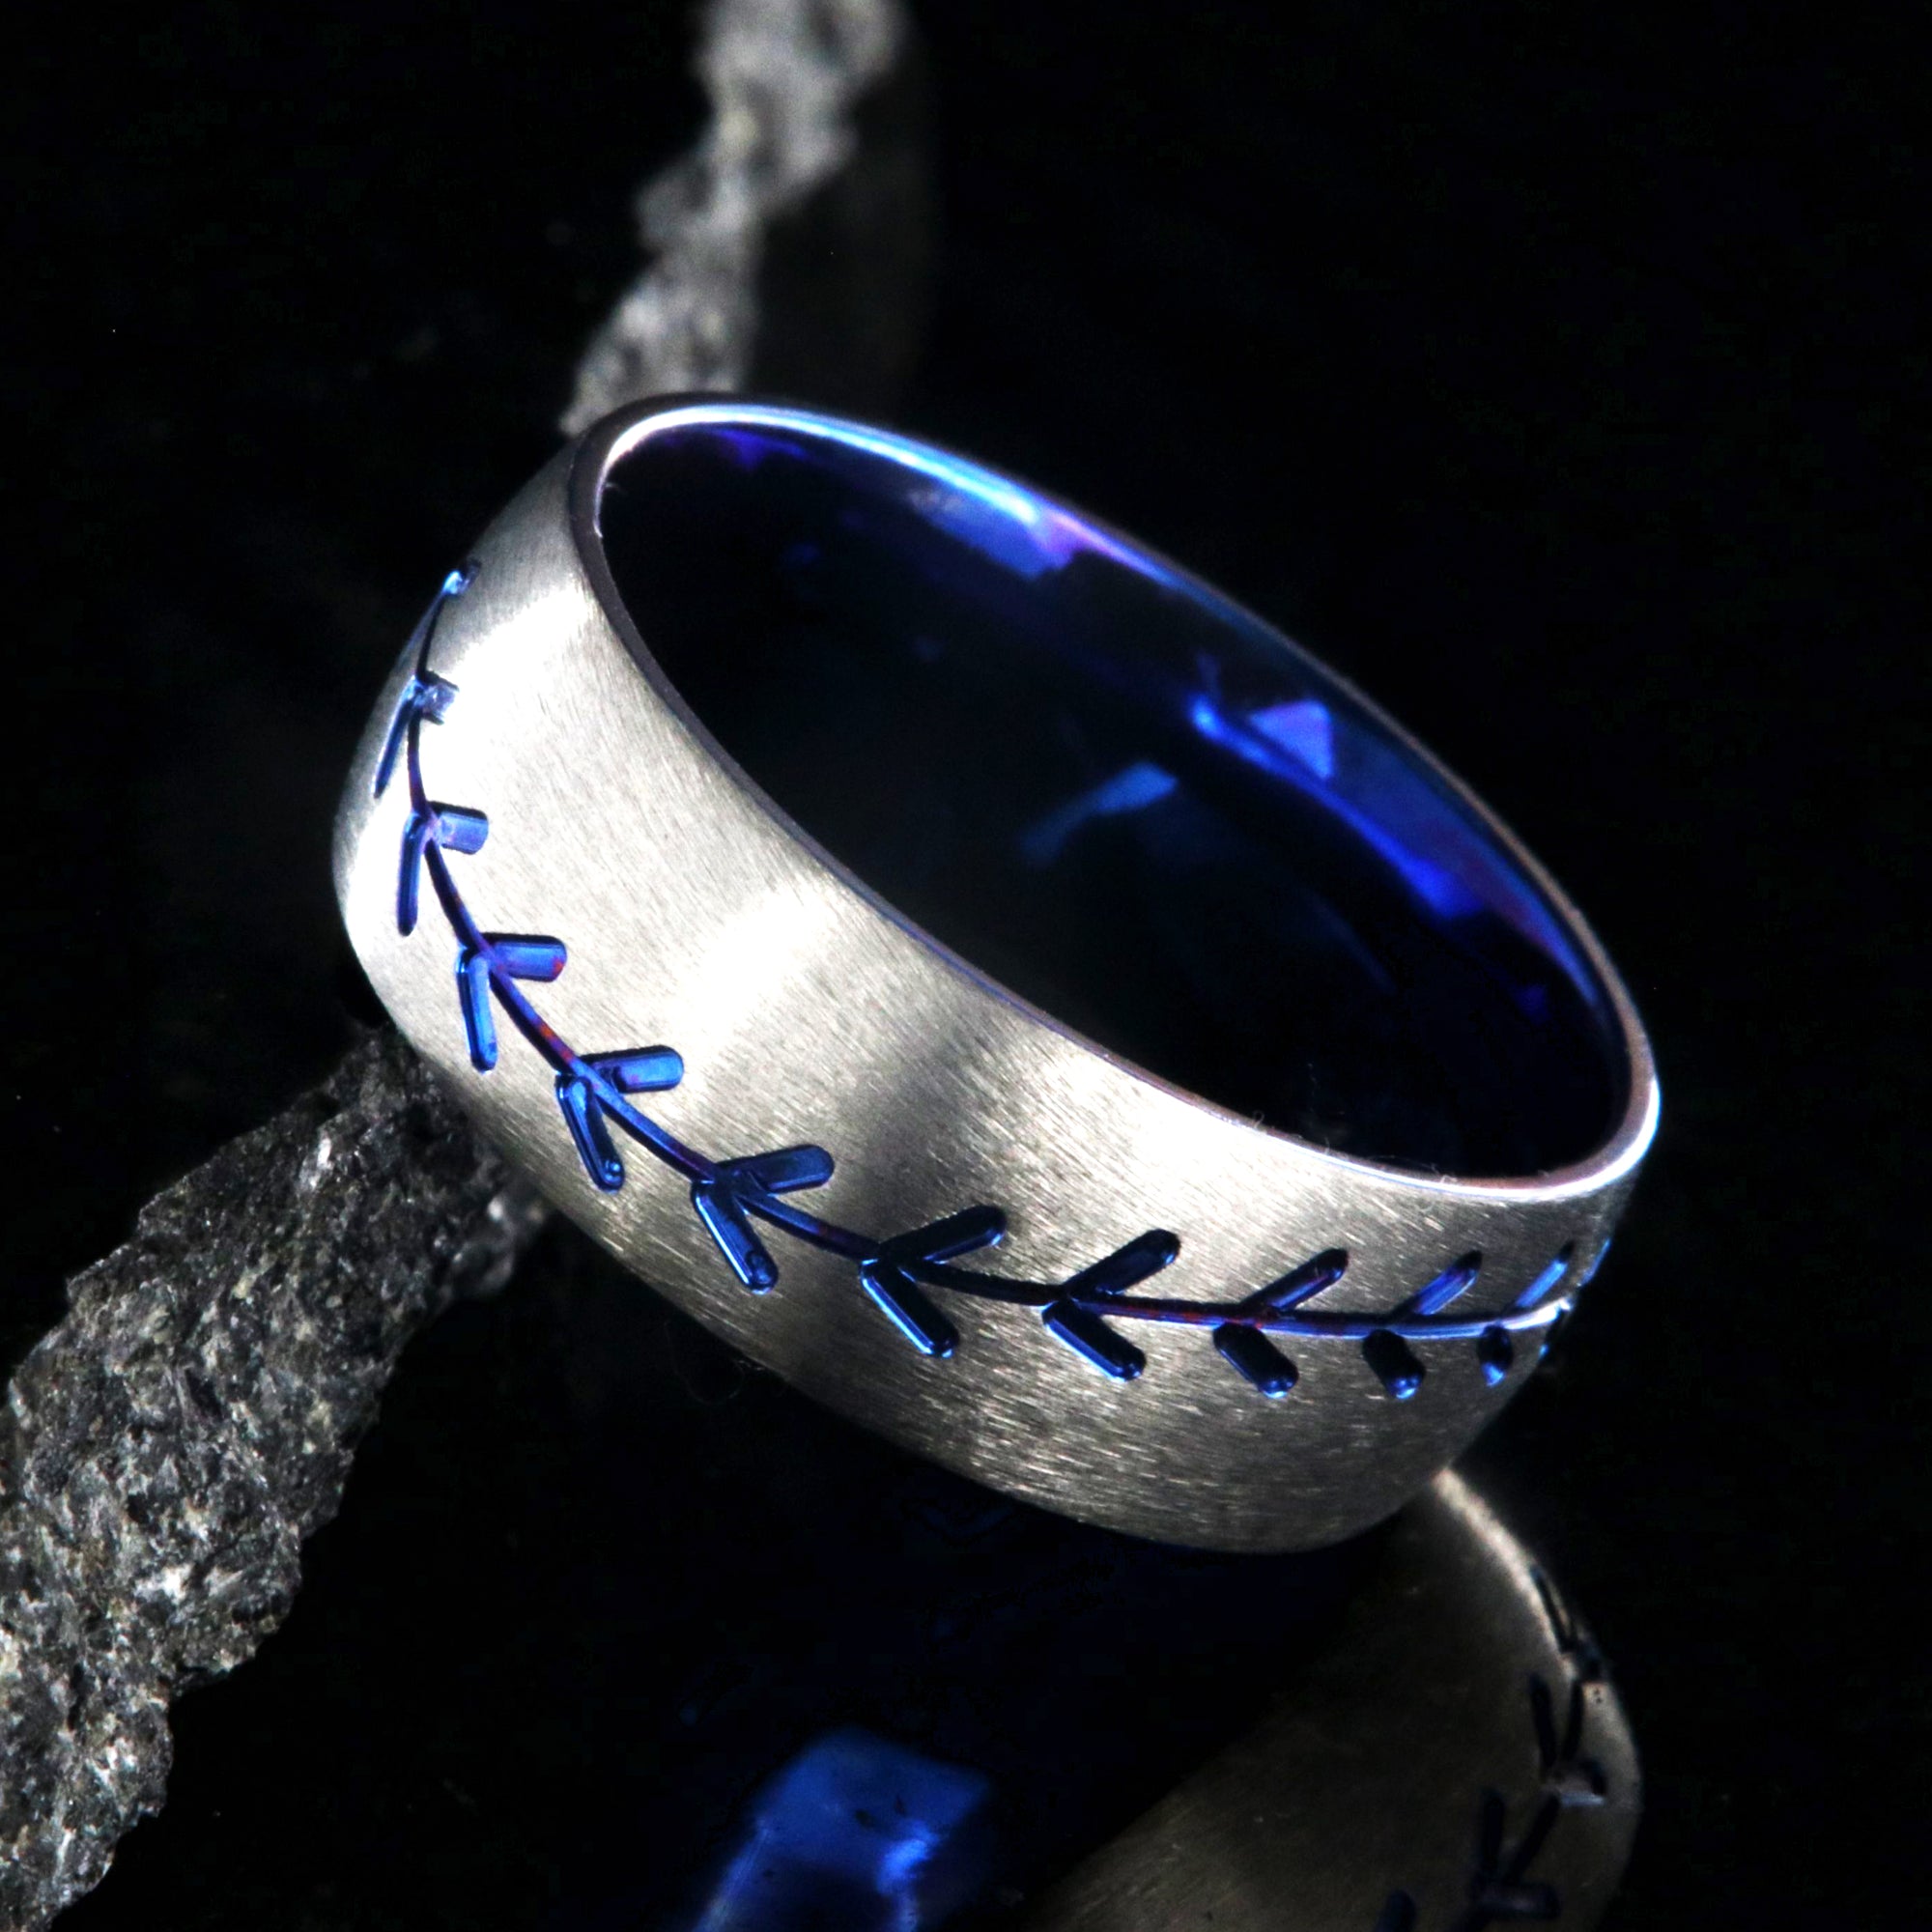 8mm wide titanium baseball ring with blue baseball stitching and a blue sleeve